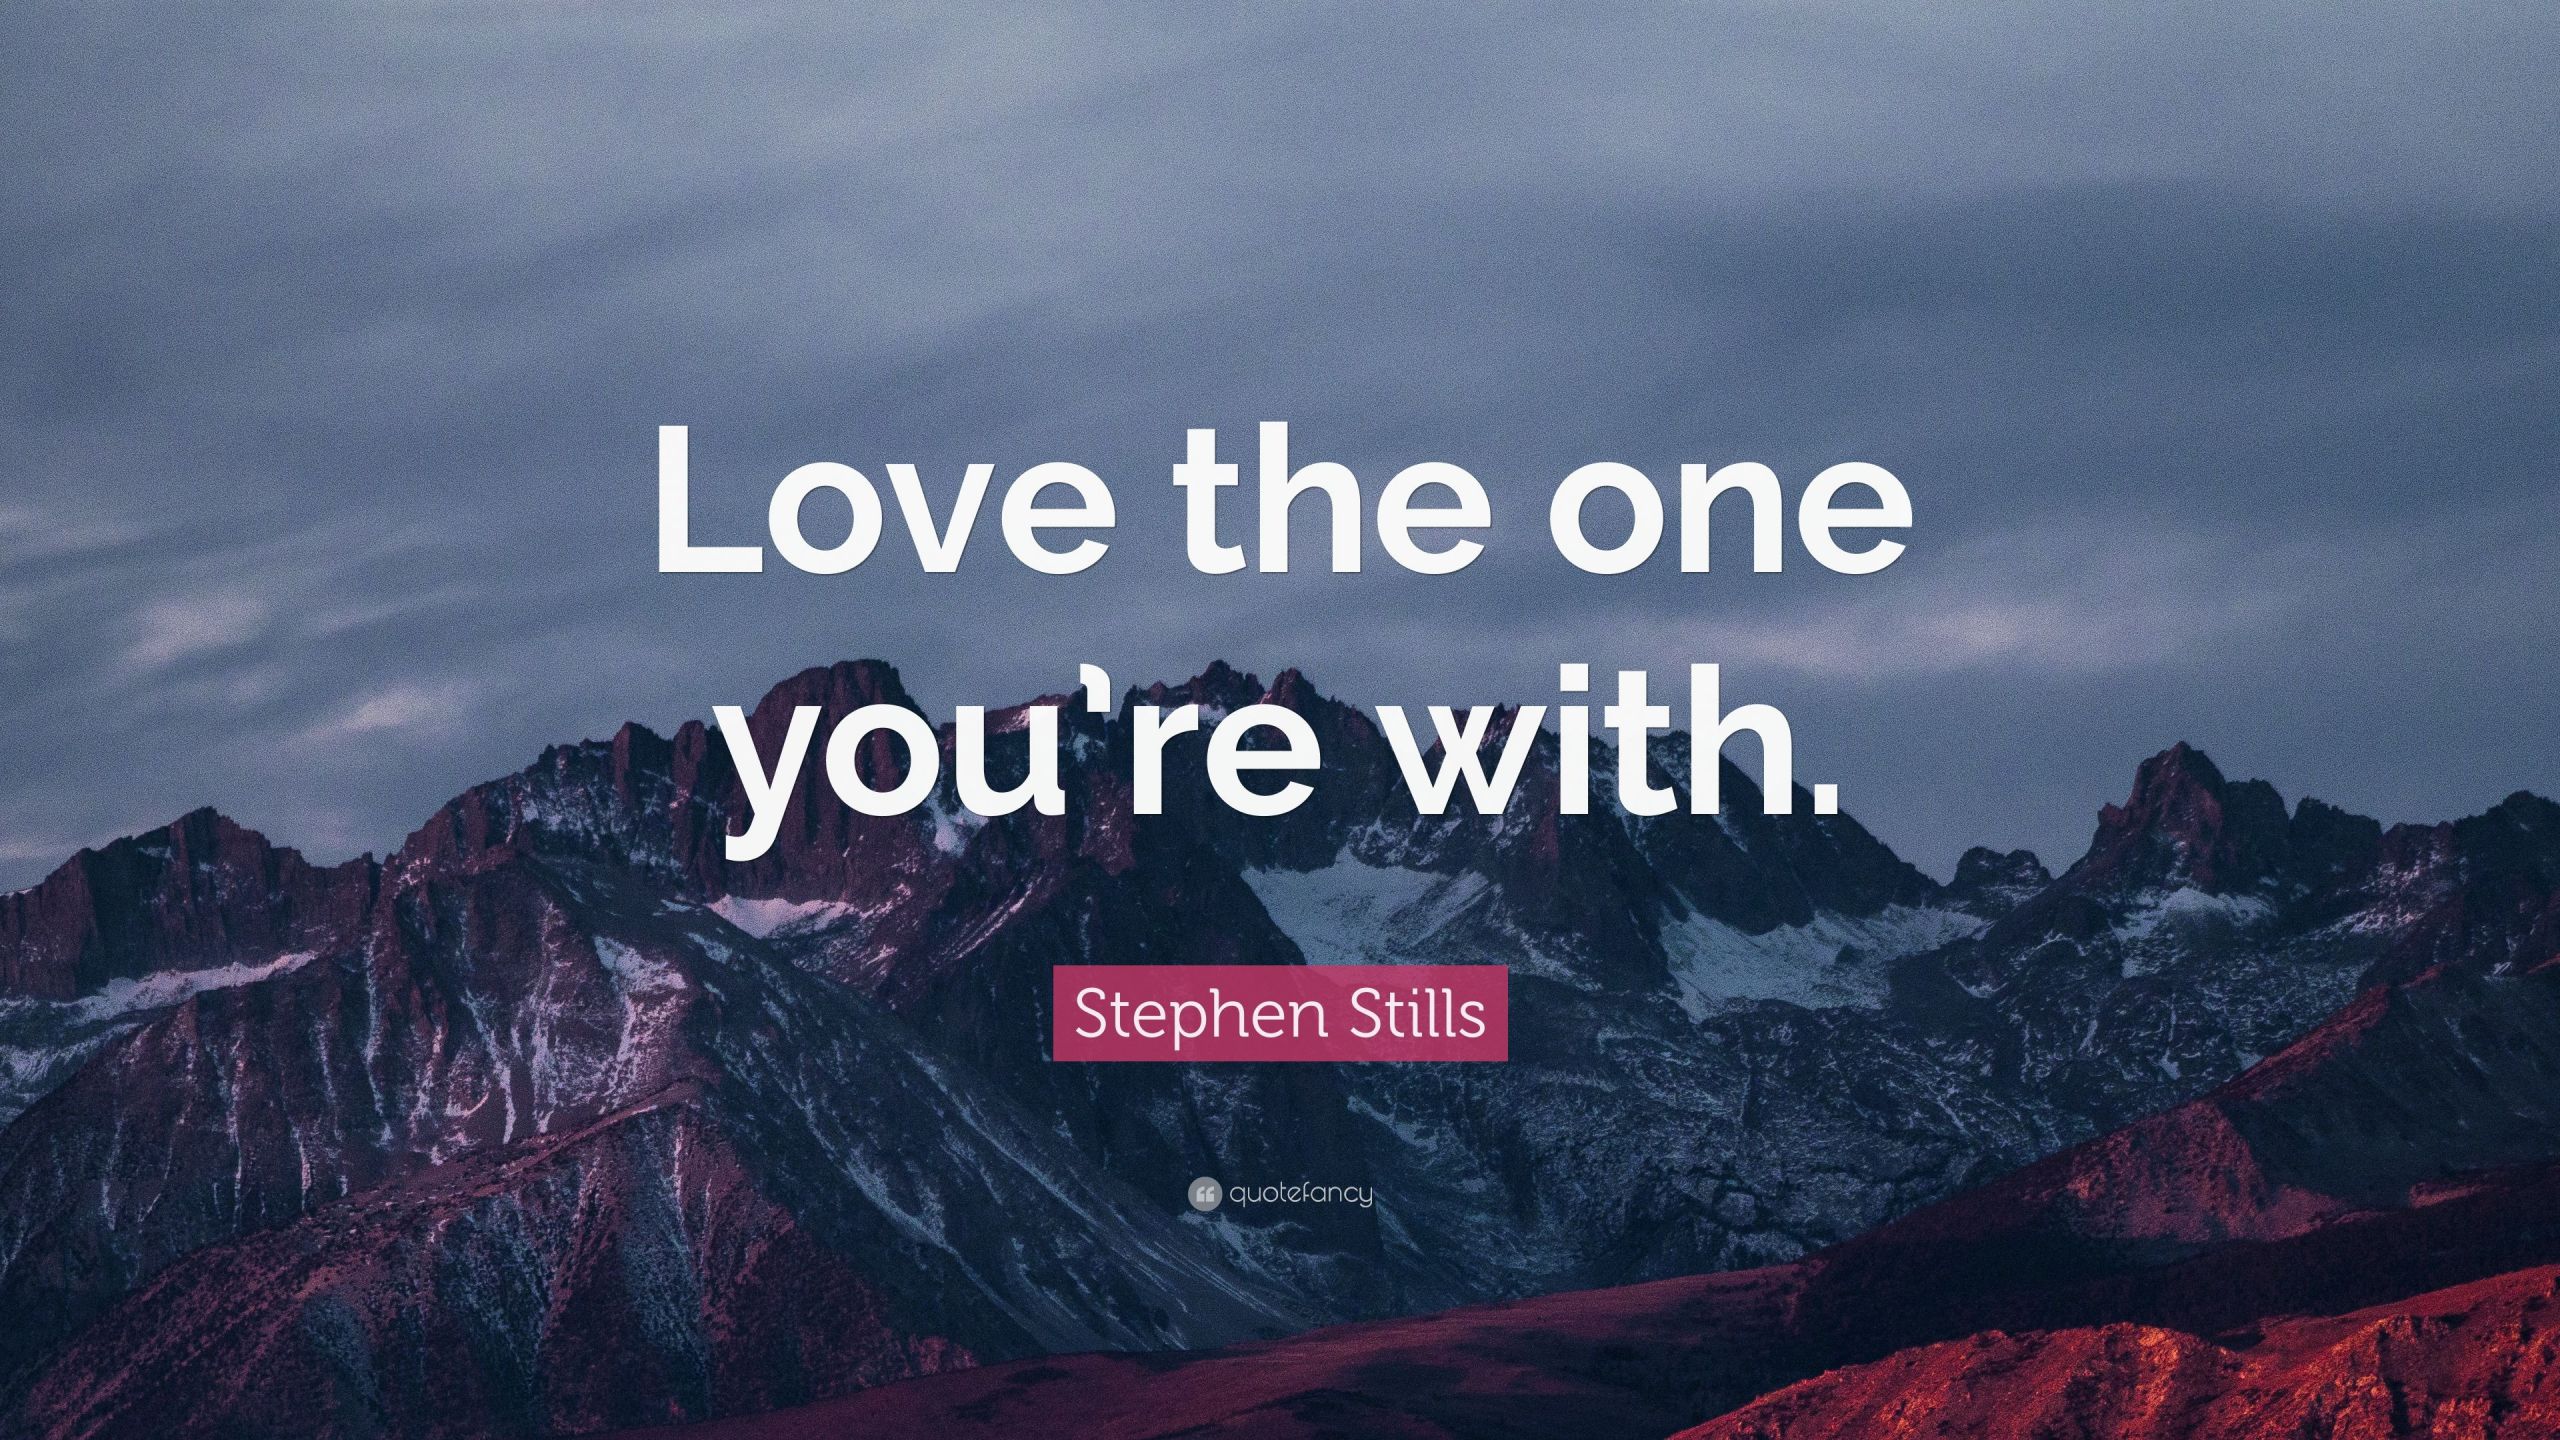 Quotes For The One You Love
 Stephen Stills Quote “Love the one you’re with ” 7